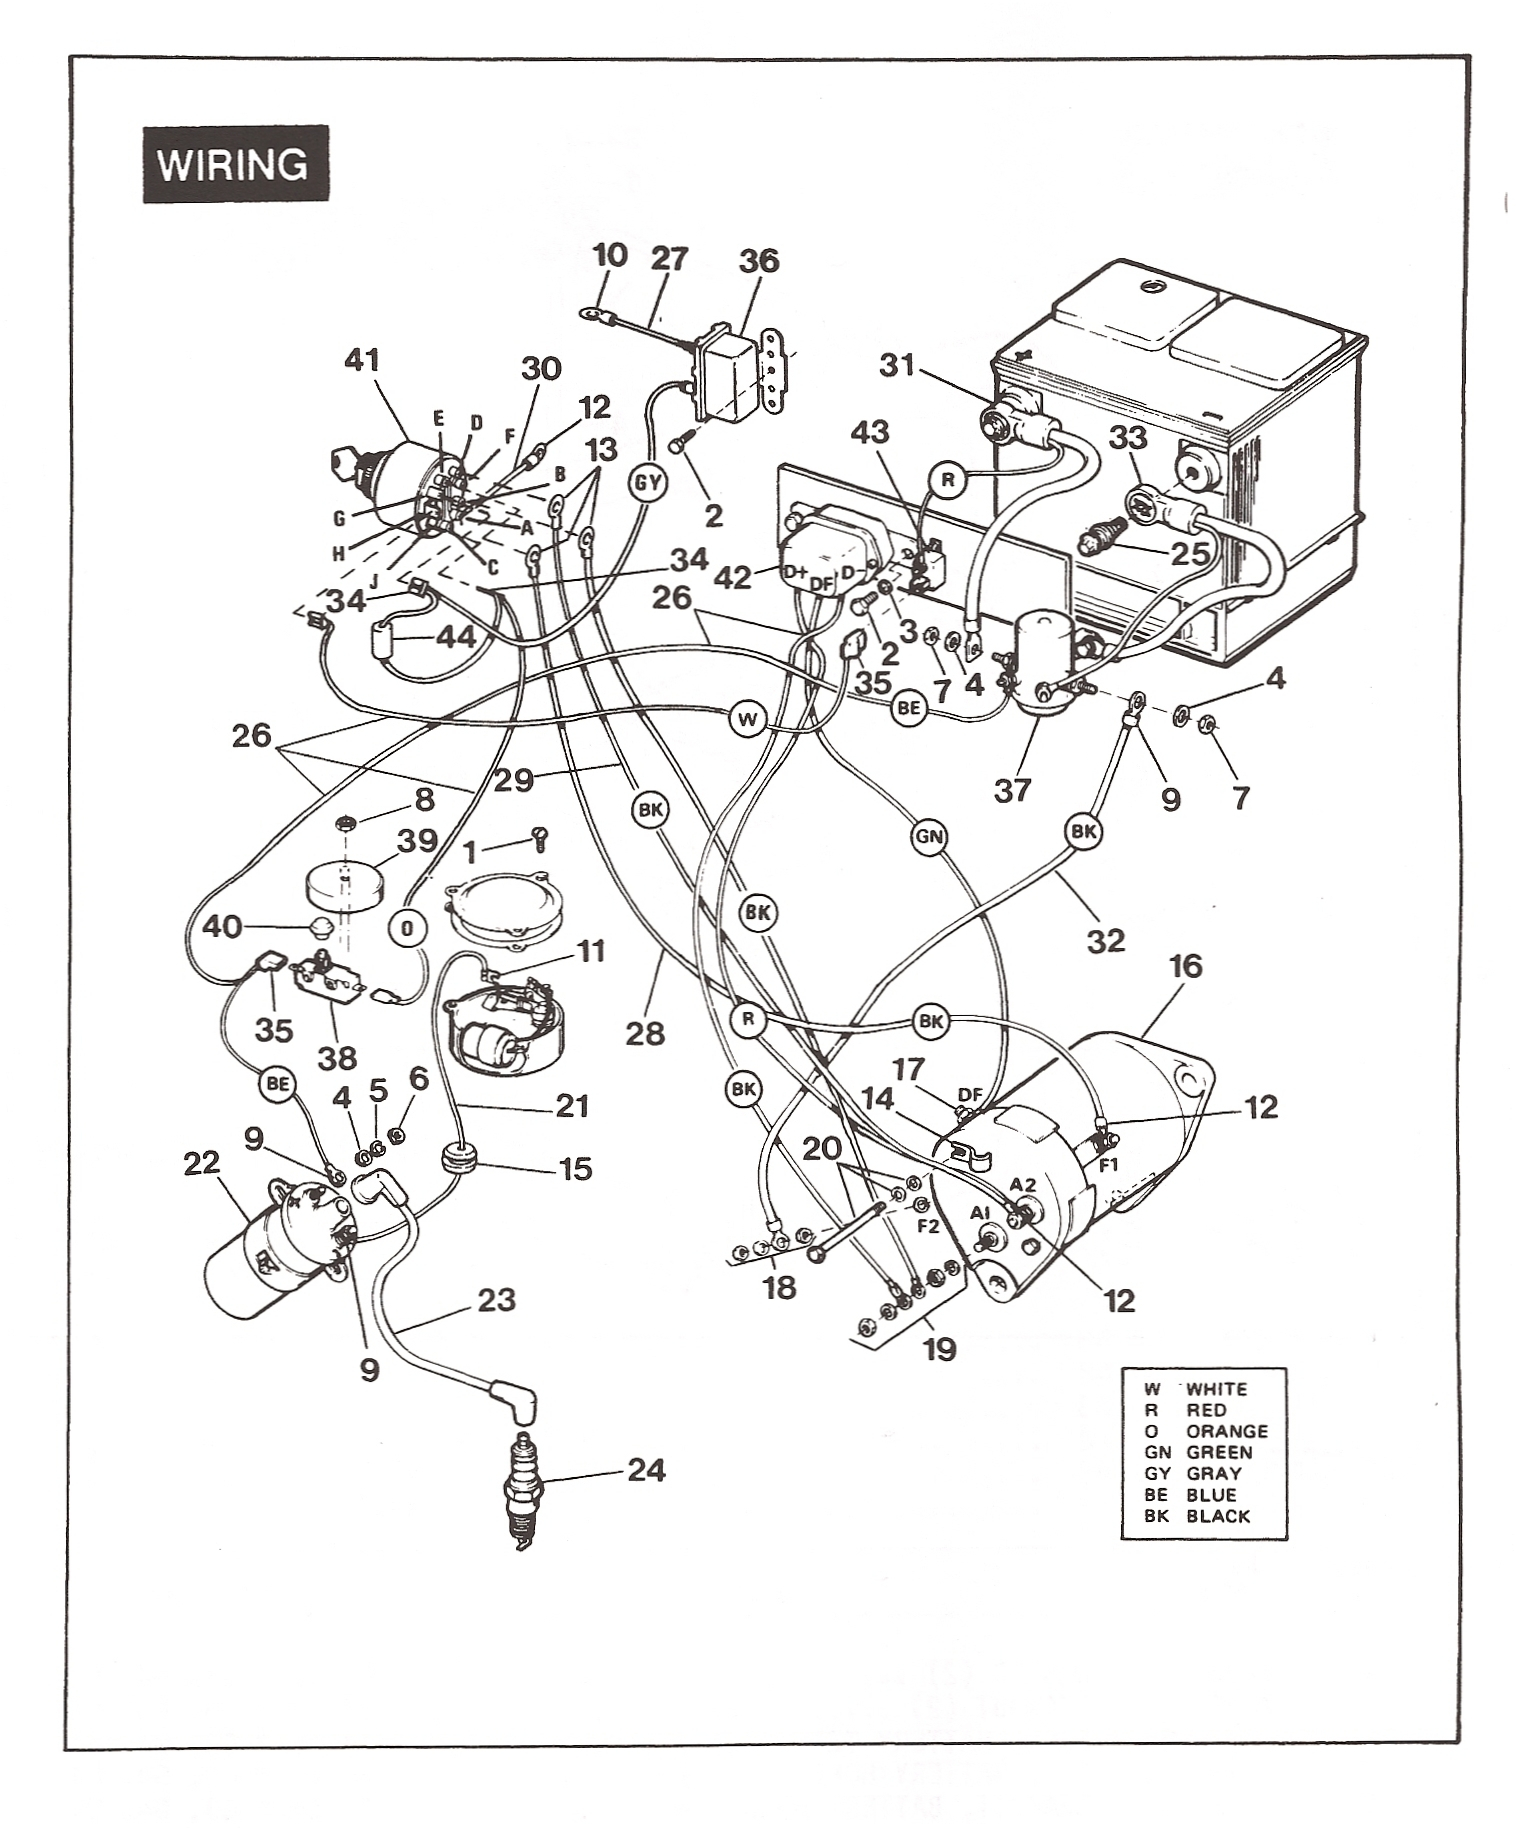 Ez Go Golf Cart Parts Diagram Wiring For Wall Socket Including Patent Us20100194539 Power Socket